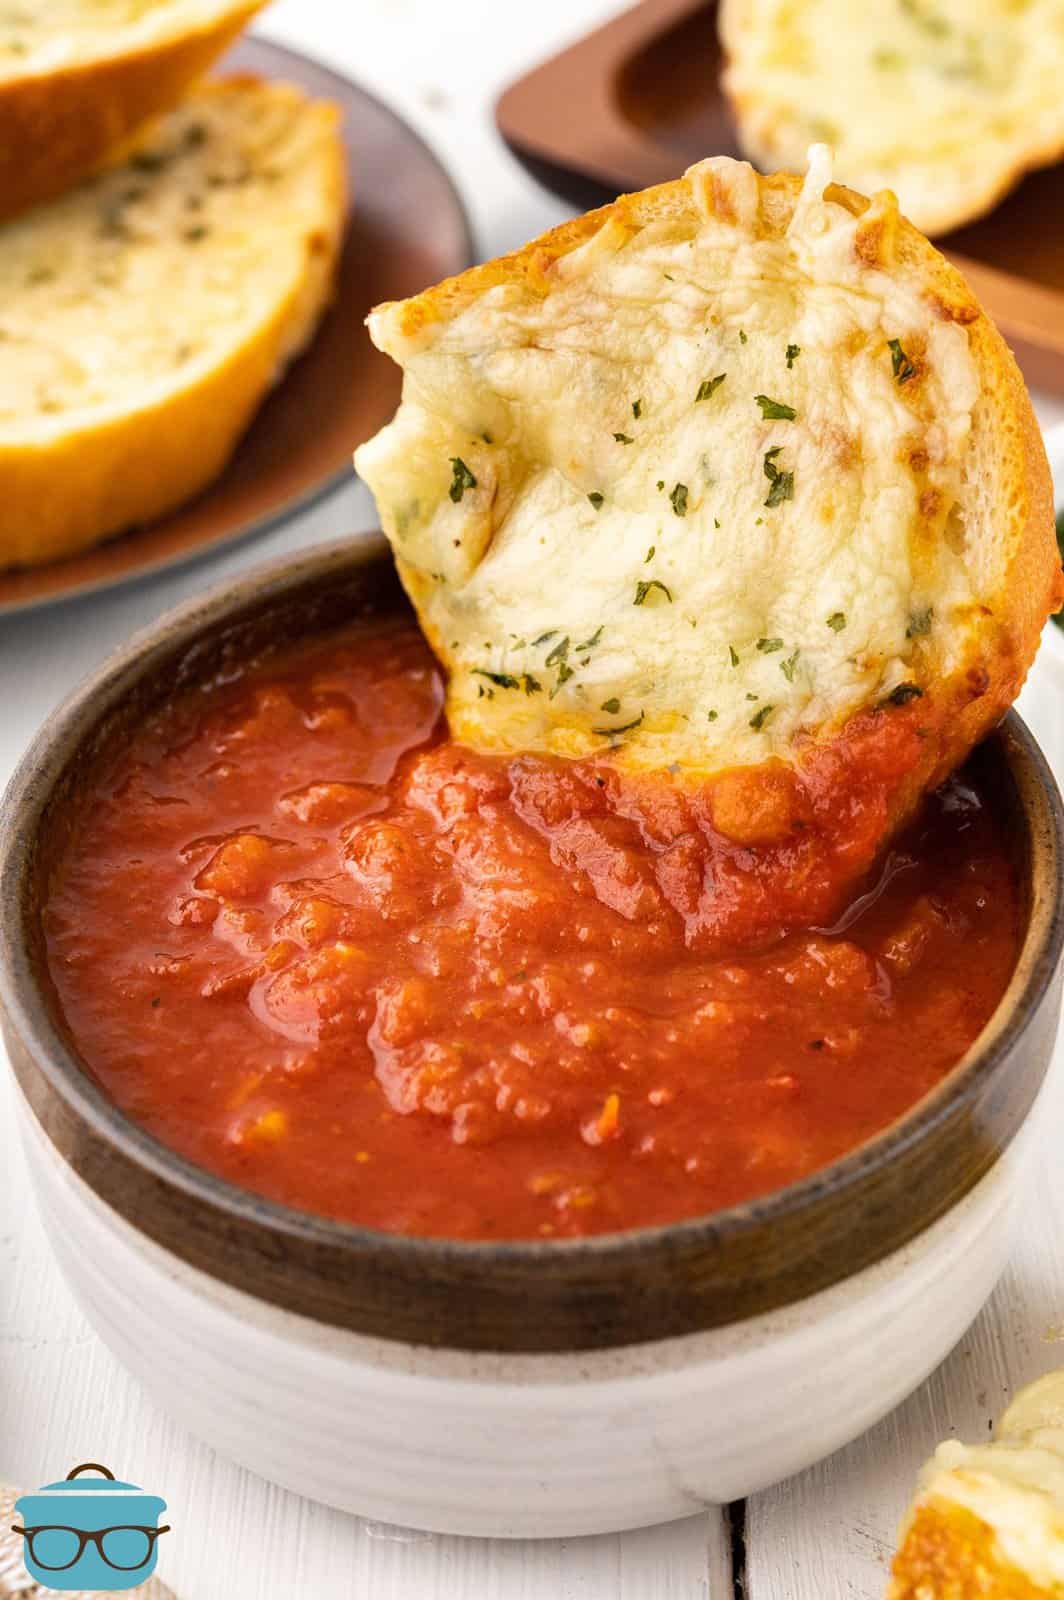 A piece of garlic bread being dipped in a bowl of marinara sauce.